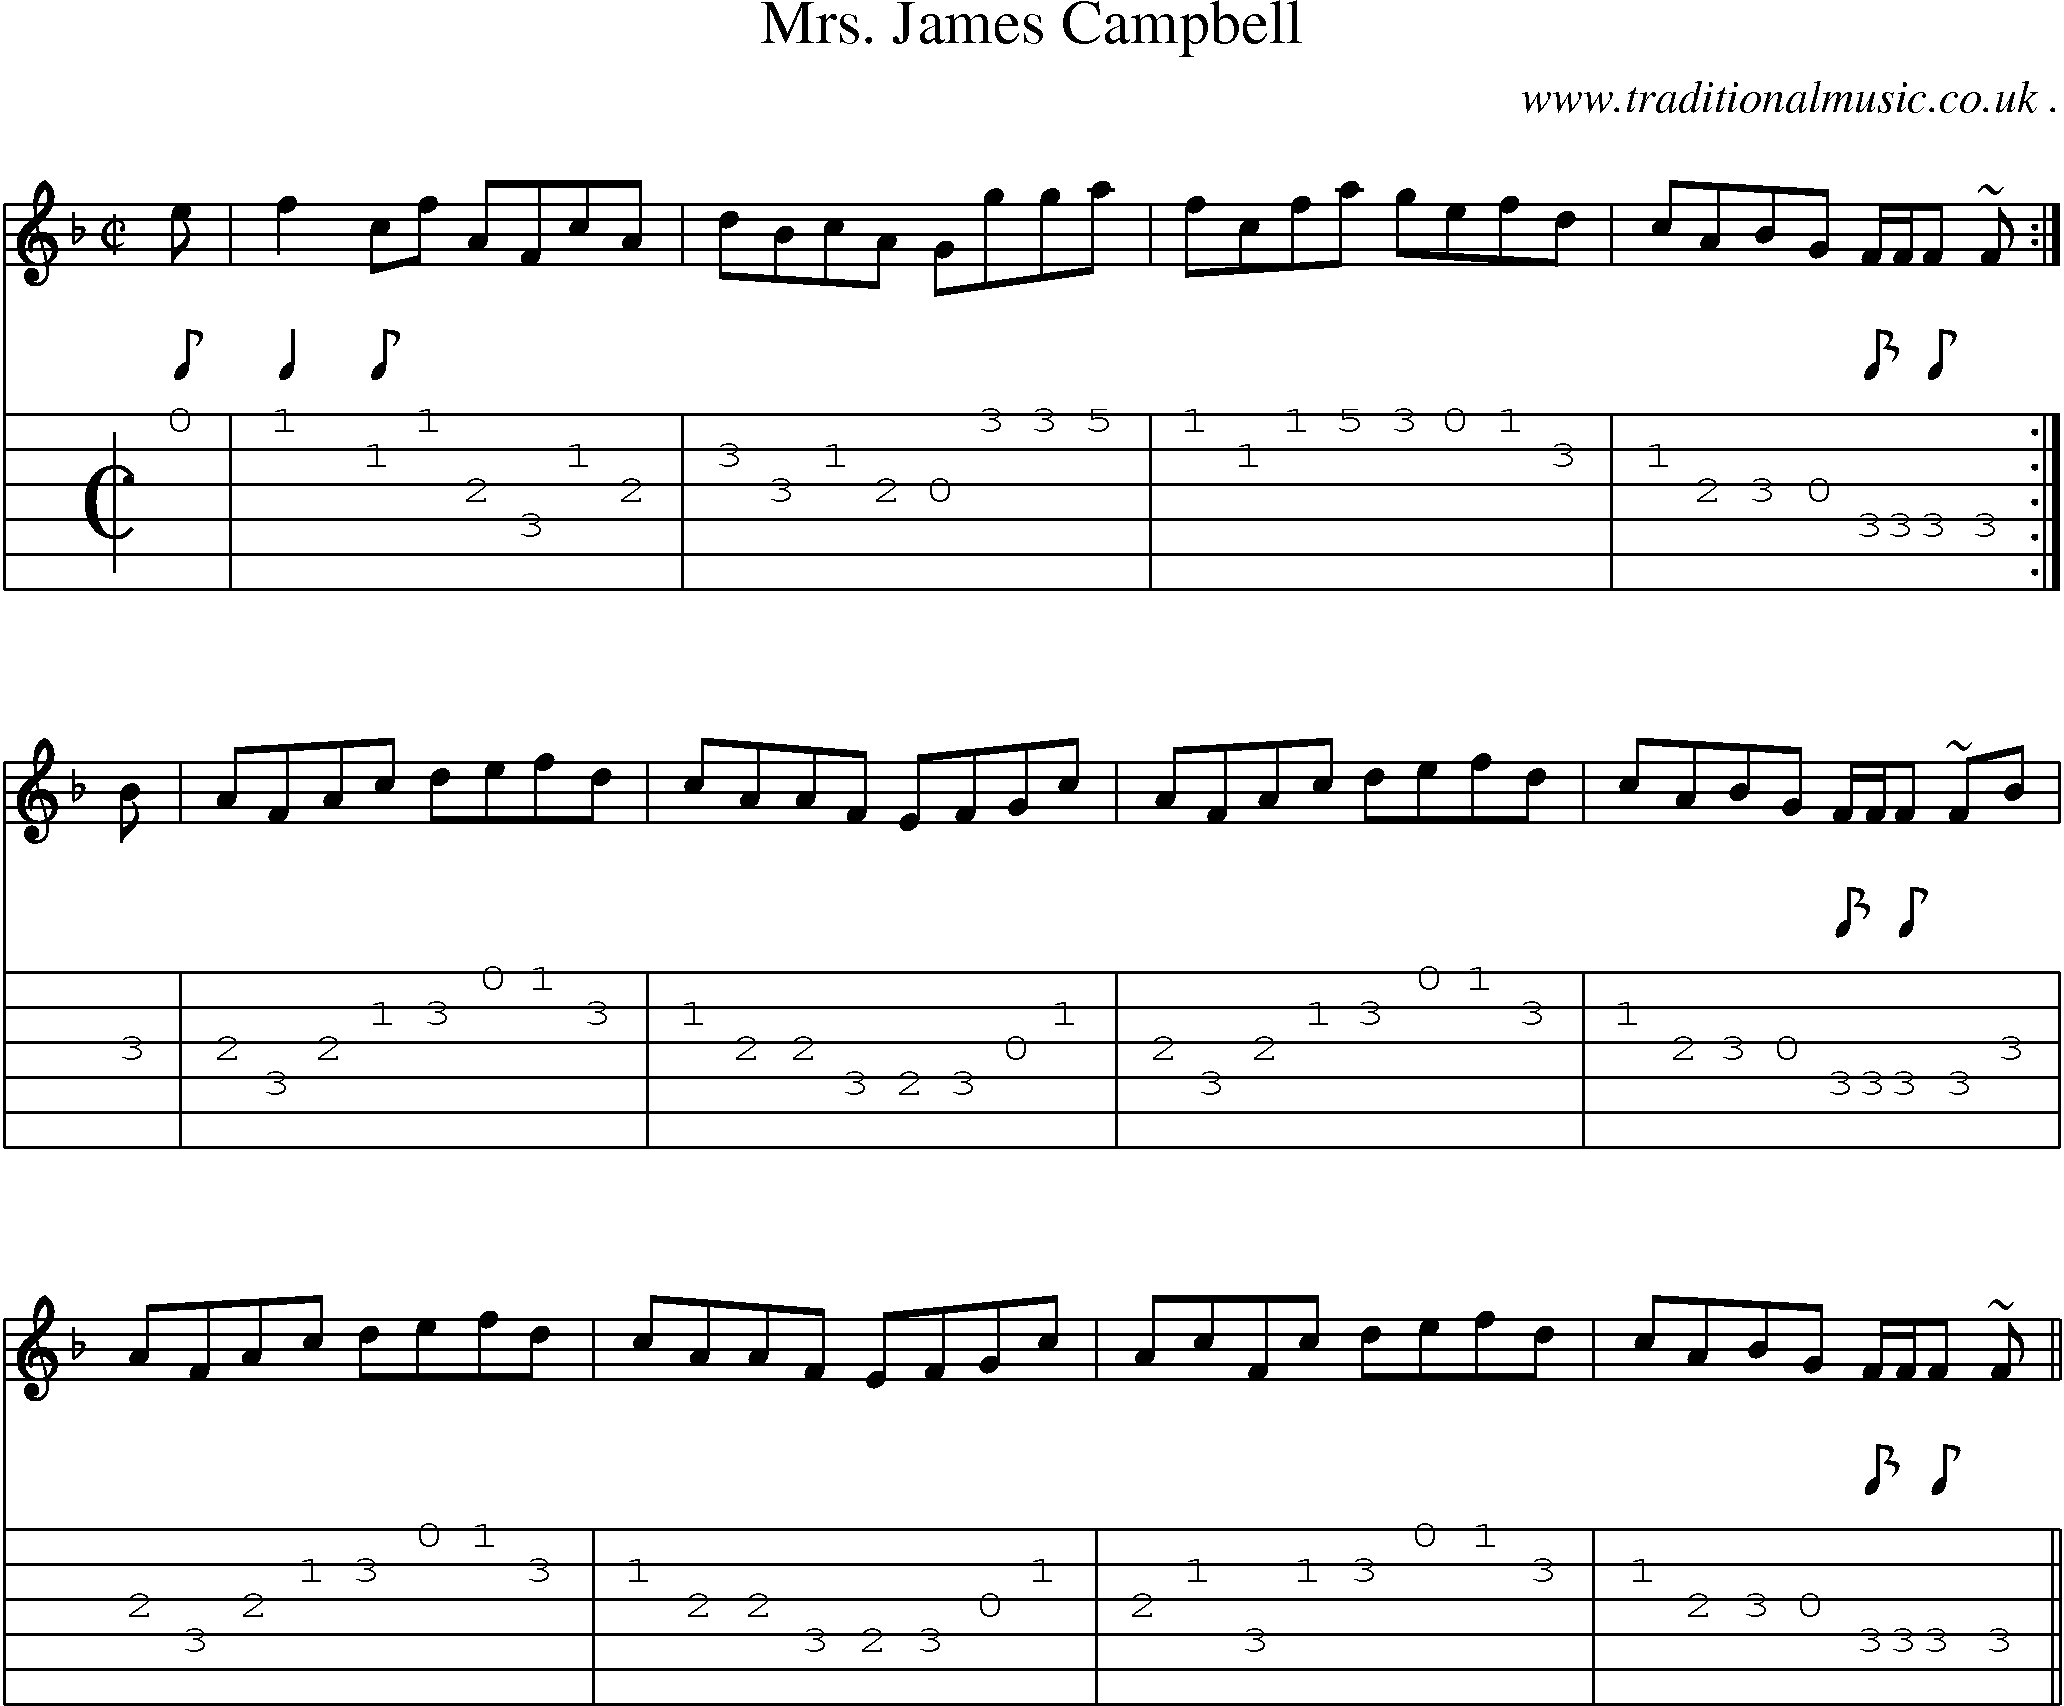 Sheet-music  score, Chords and Guitar Tabs for Mrs James Campbell